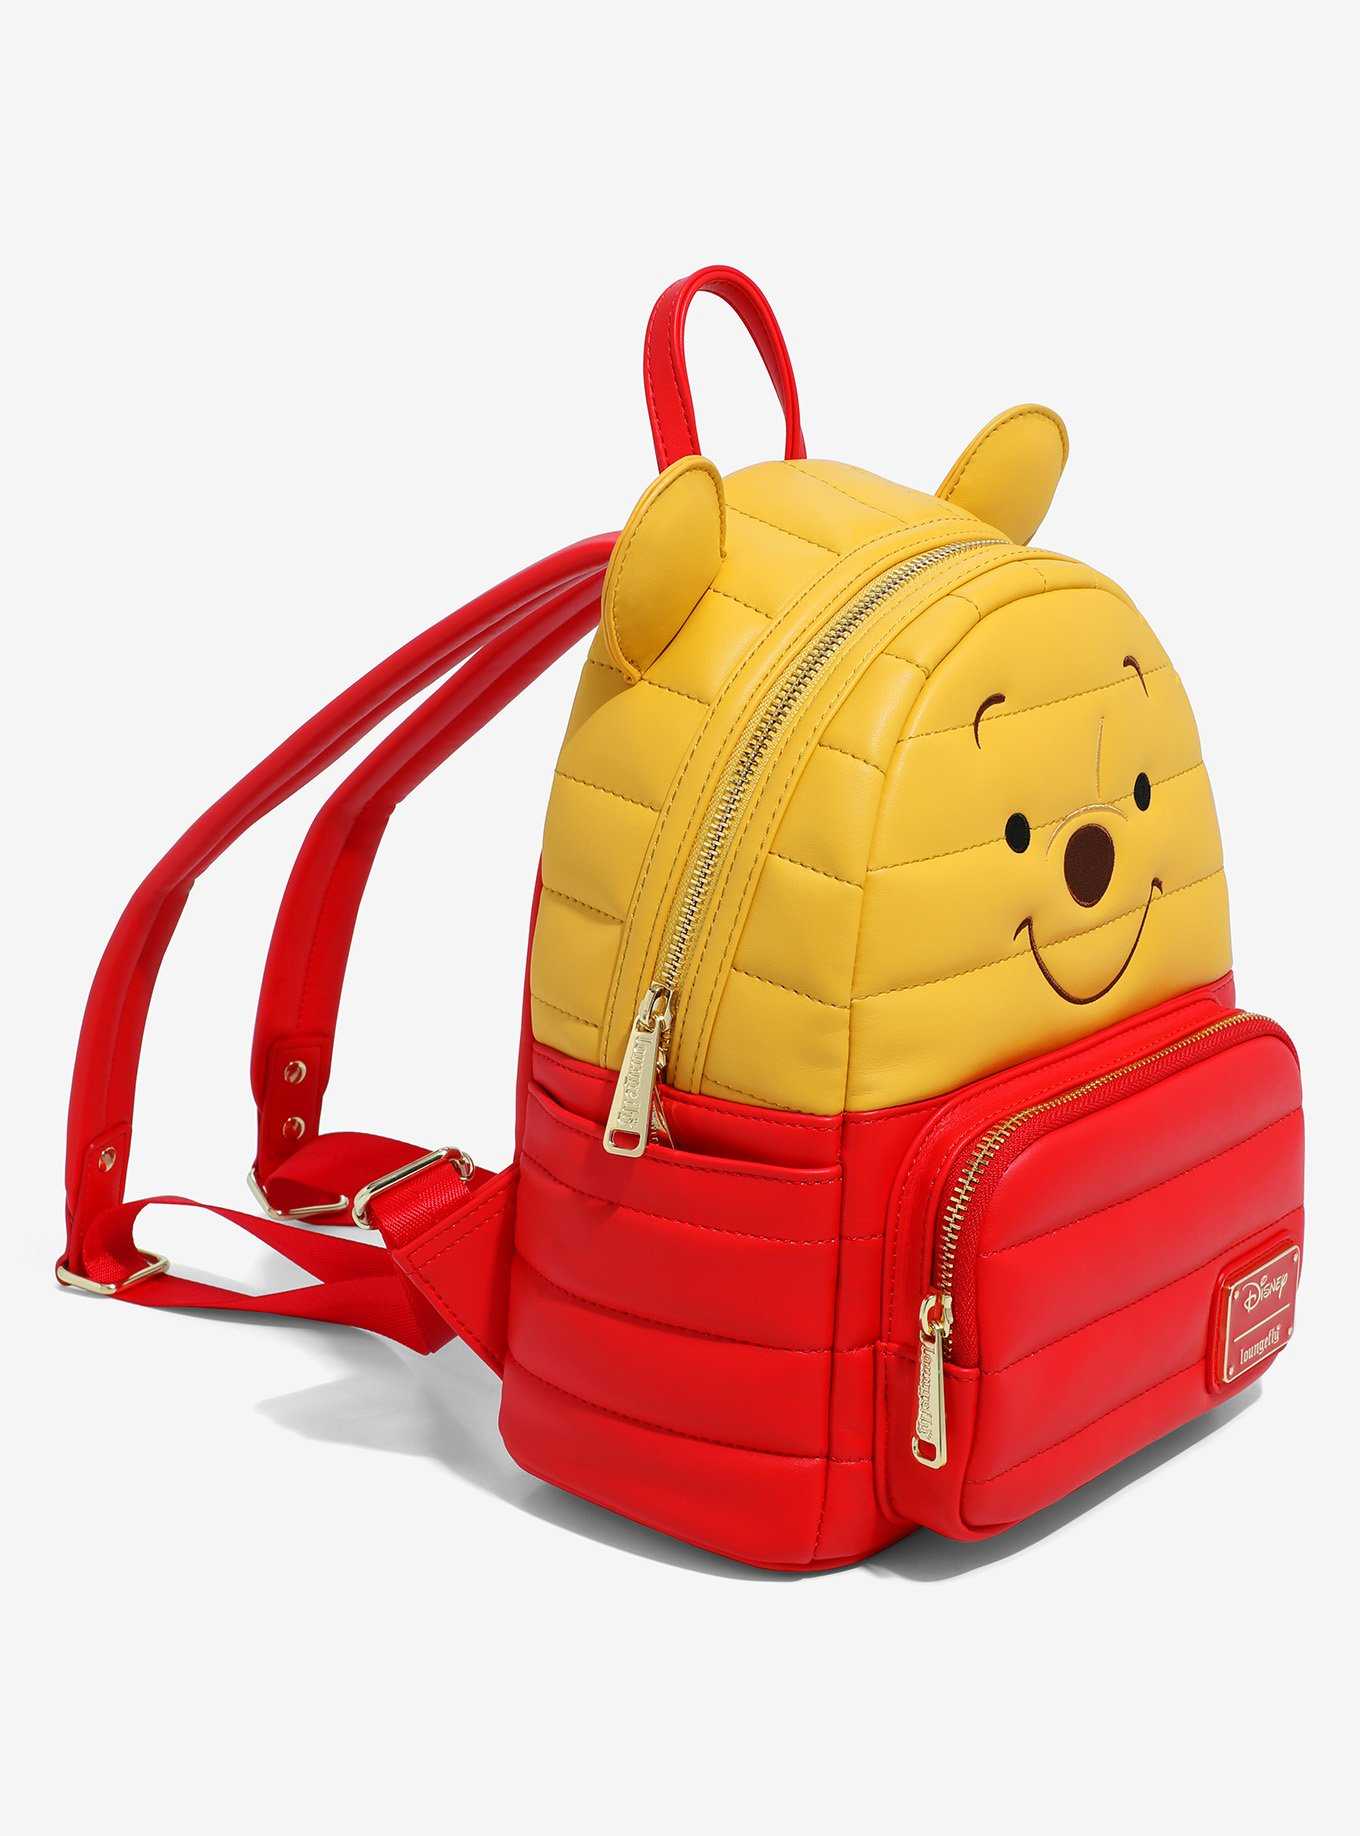 Loungefly Disney Winnie the Pooh Puffer Pooh Bear Figural Mini Backpack - BoxLunch Exclusive, , hi-res